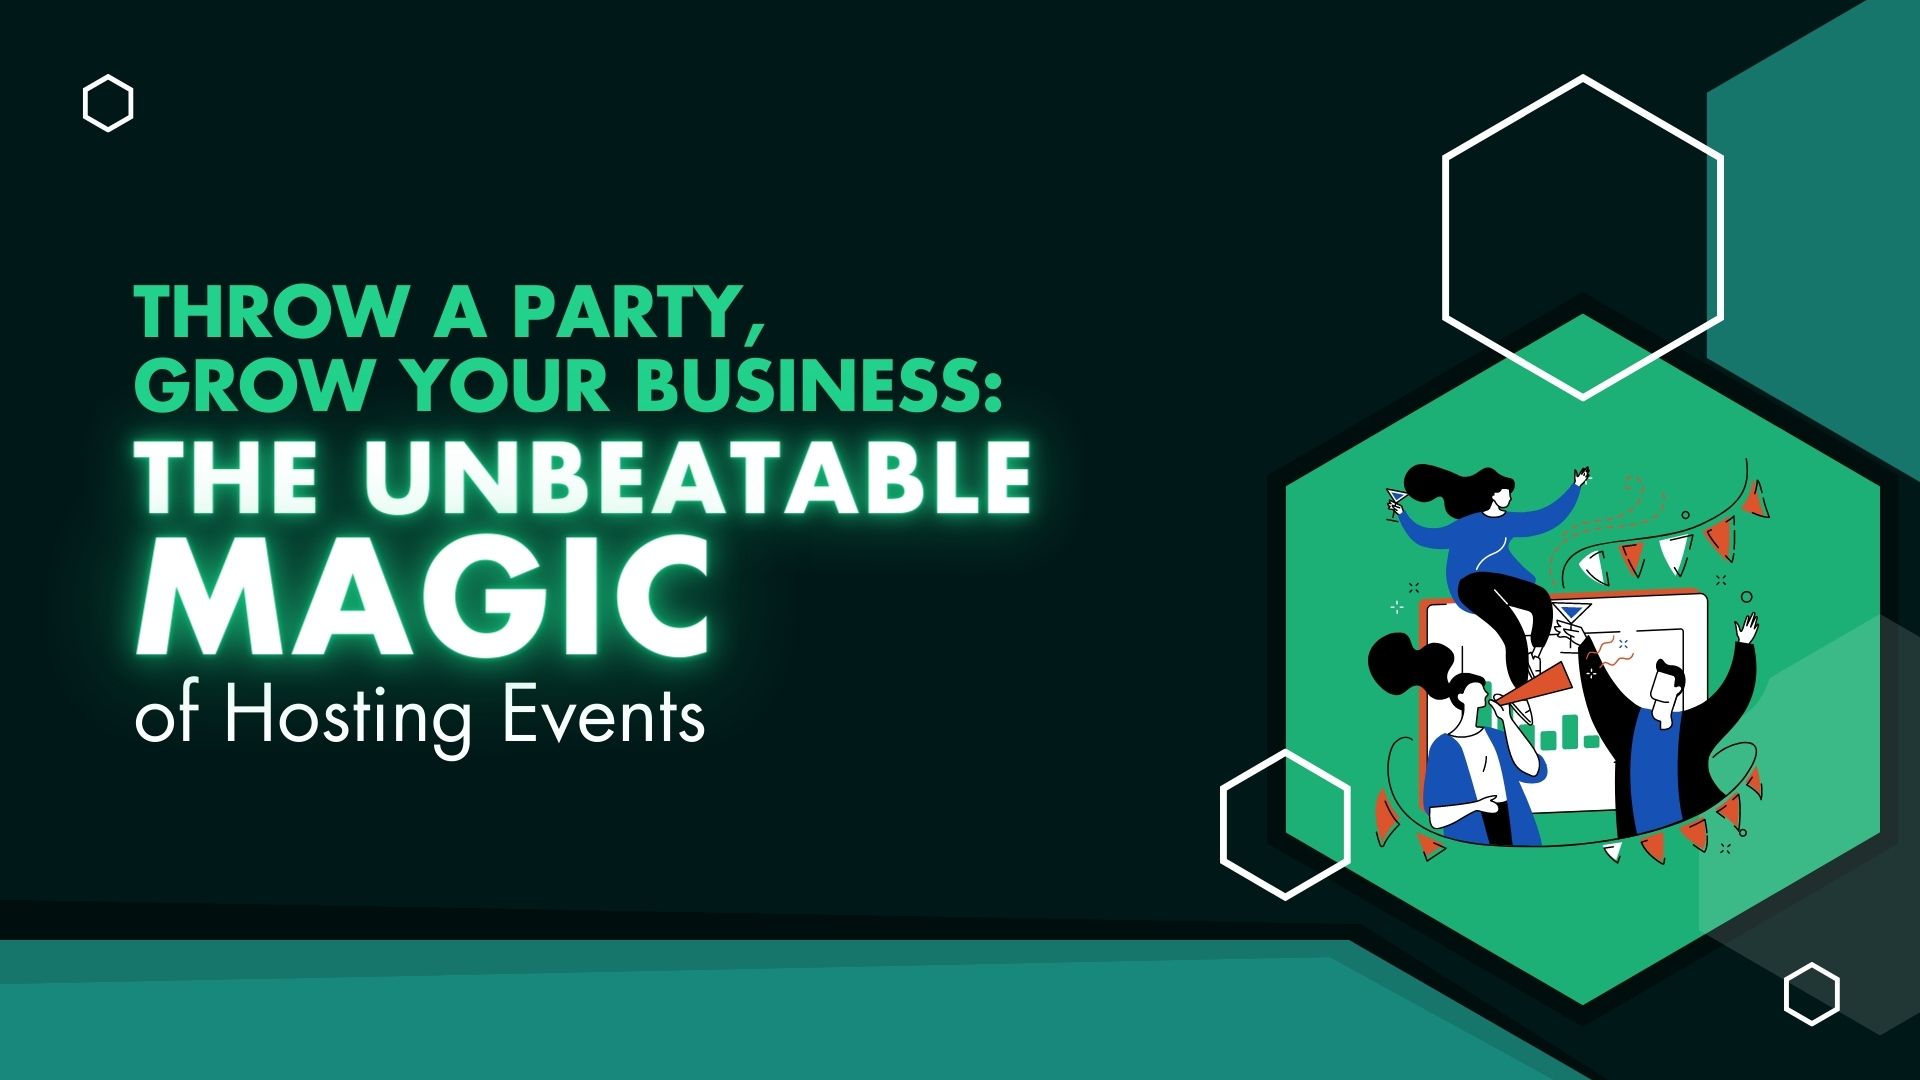 Throw a Party, Grow Your Business: The Unbeatable Magic of Hosting Events